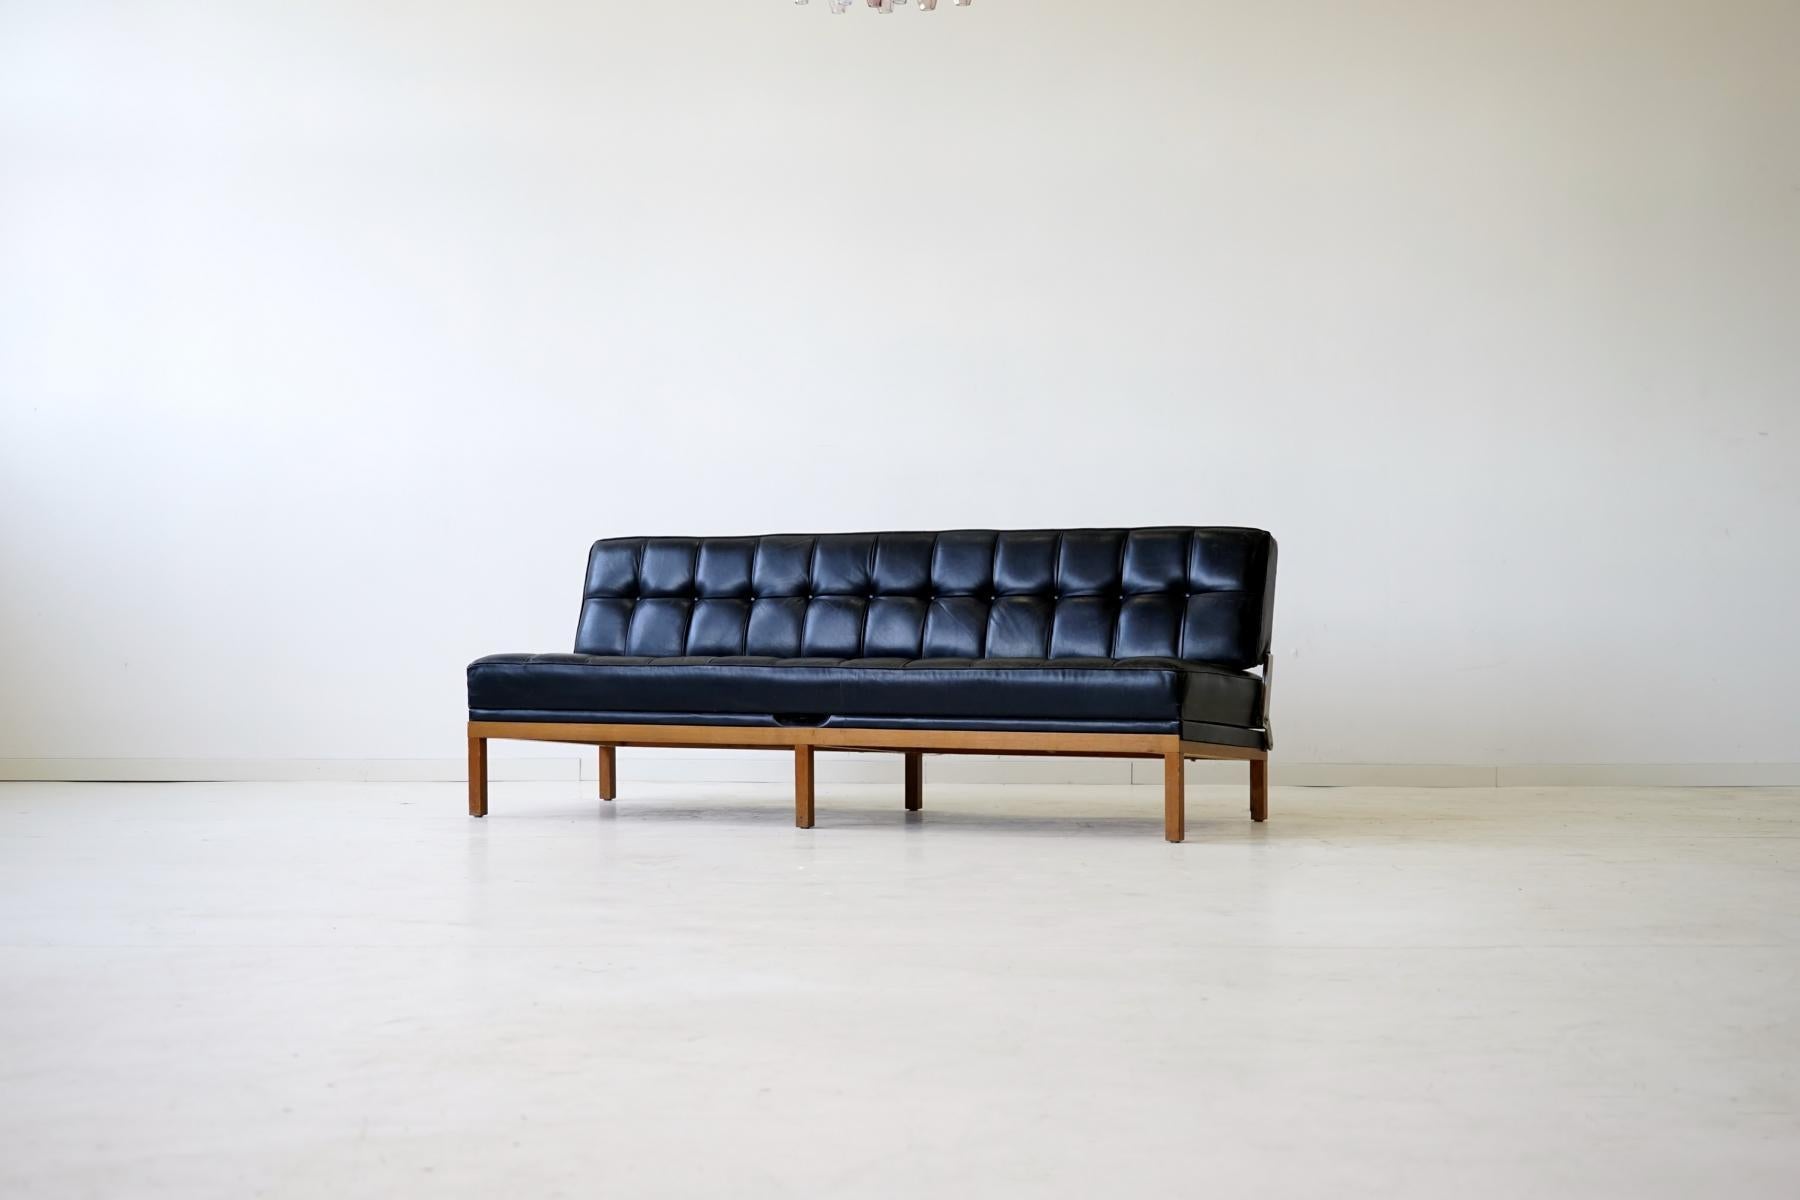 Sofa / Daybed Constance by Johannes Spalt for Wittmann, 1961
Early model from 1961 in very nice original condition

Here is the Classic in black supple original leather.
The foam is impeccable and the mechanism works great.

Very high-quality